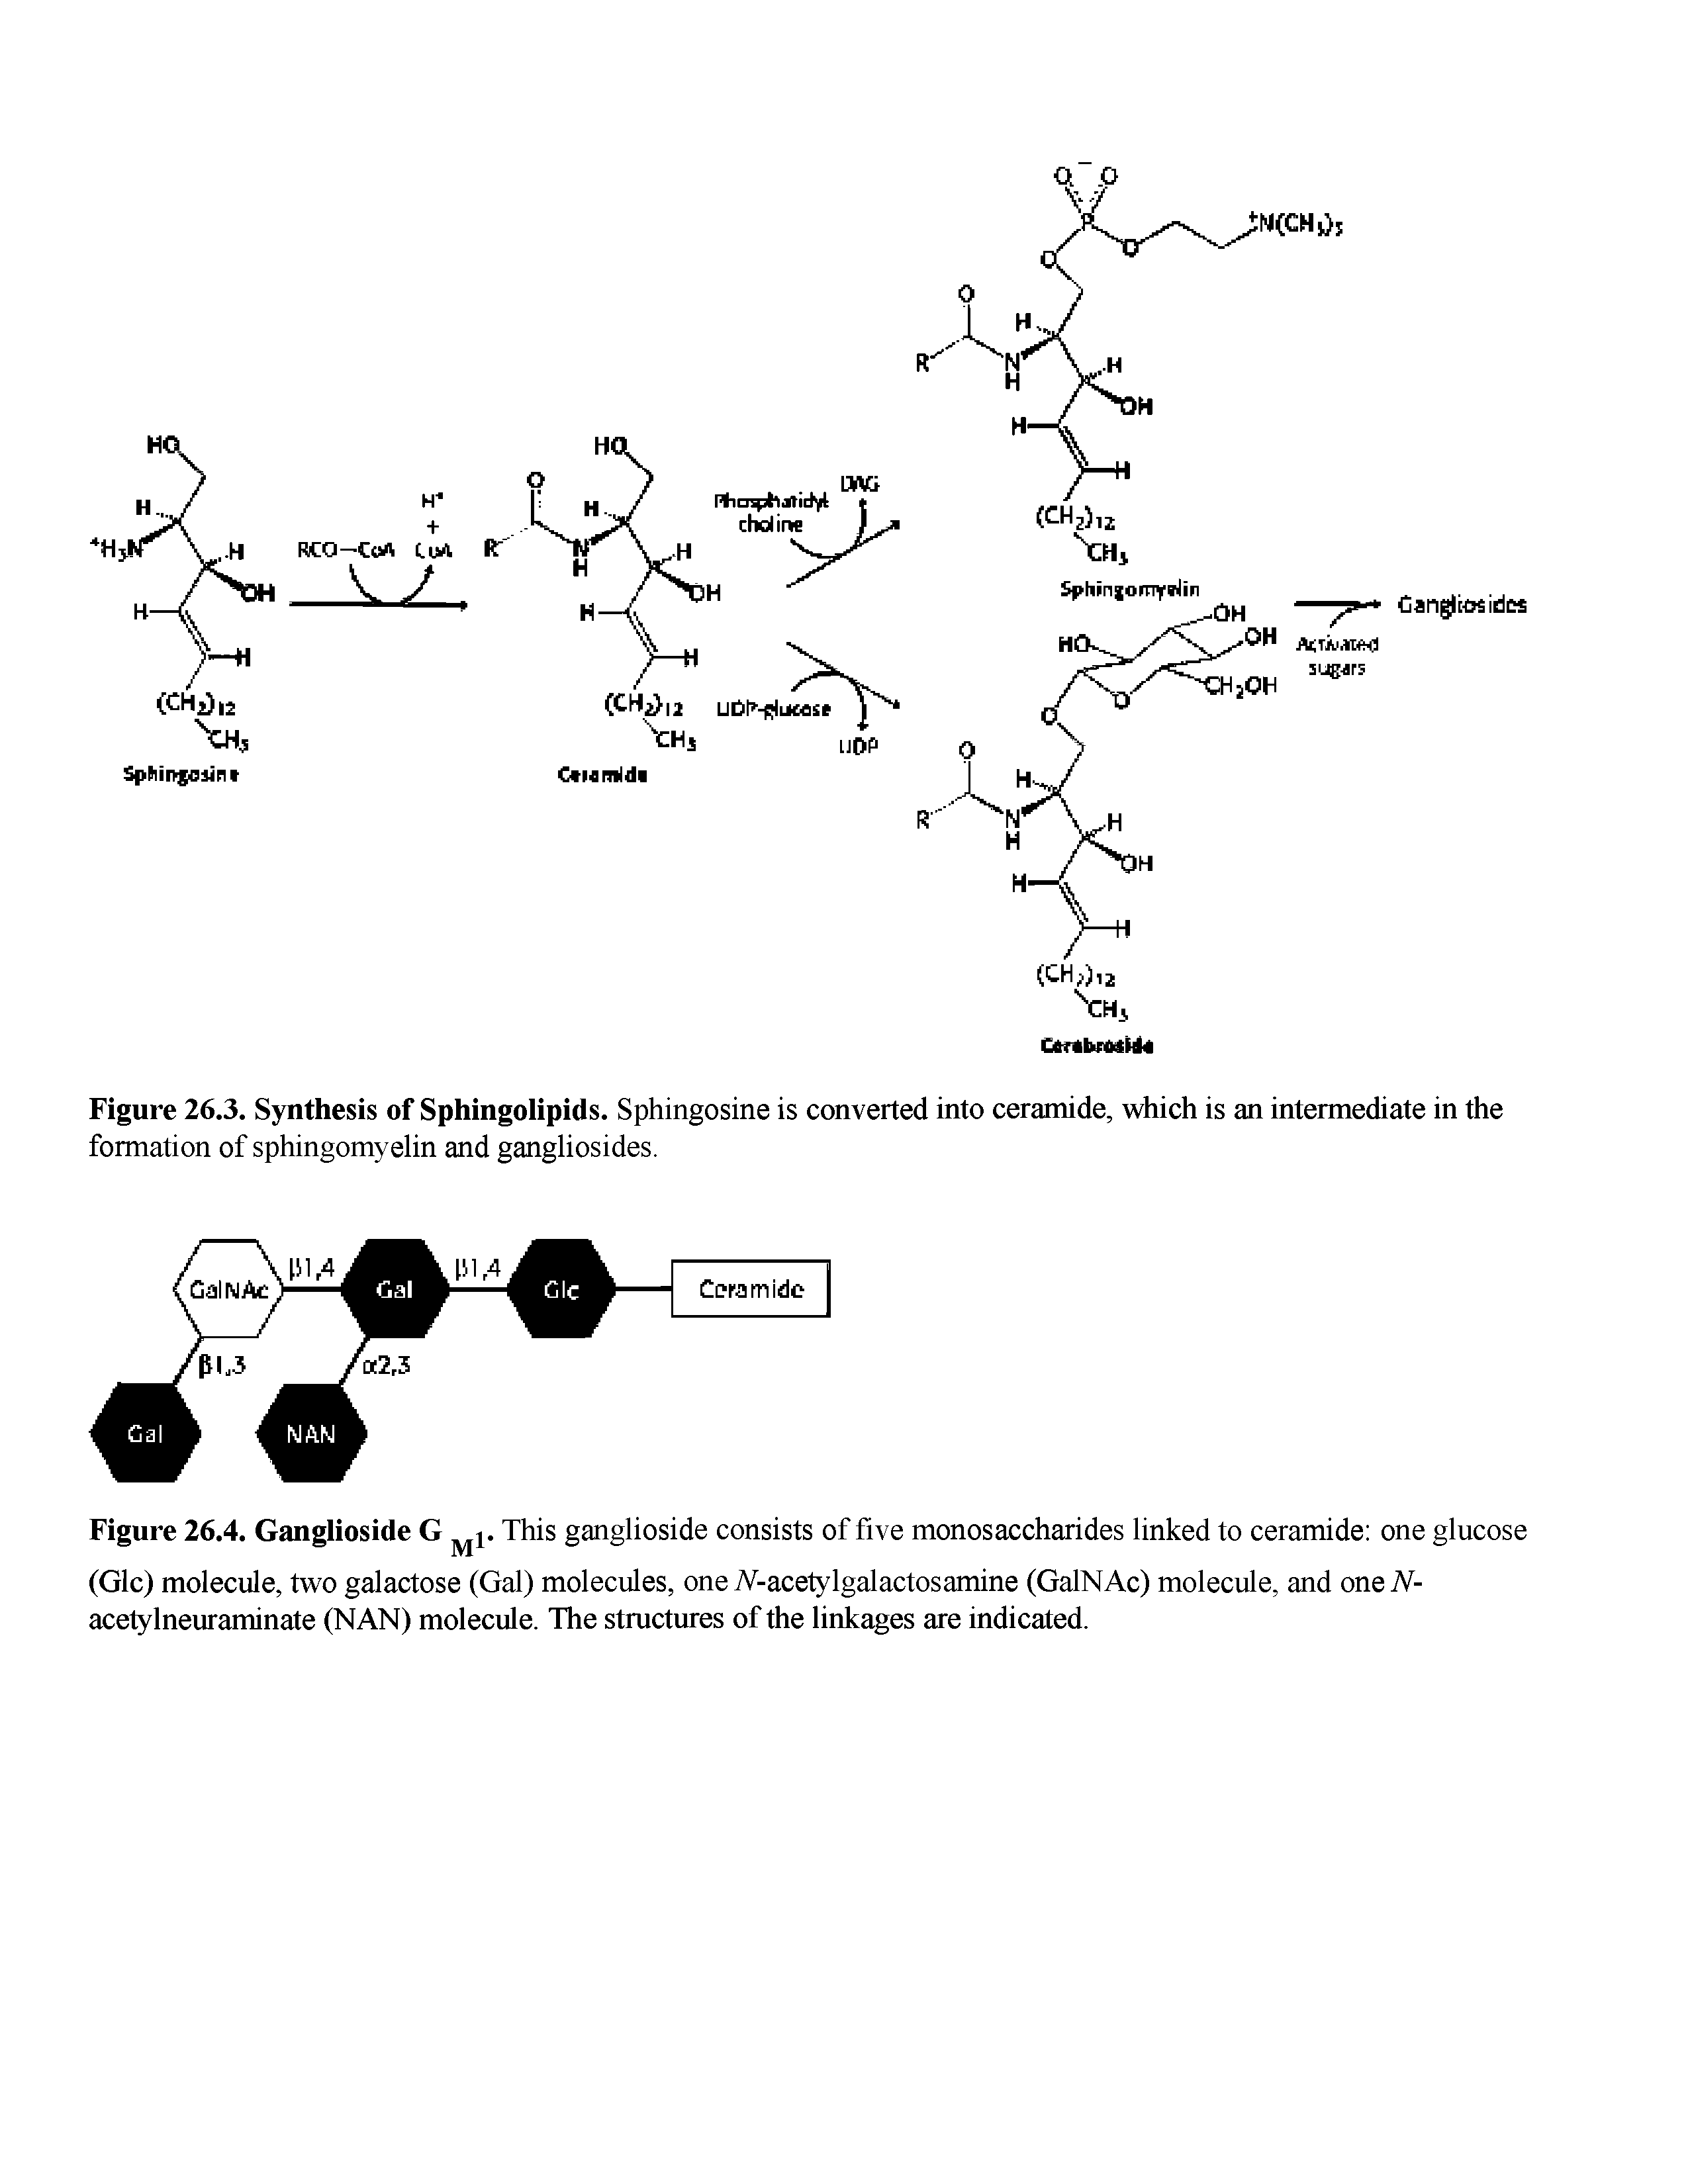 Figure 26.3. Synthesis of Sphingolipids. Sphingosine is converted into ceramide, which is an intermediate in the formation of sphingomyelin and gangliosides.